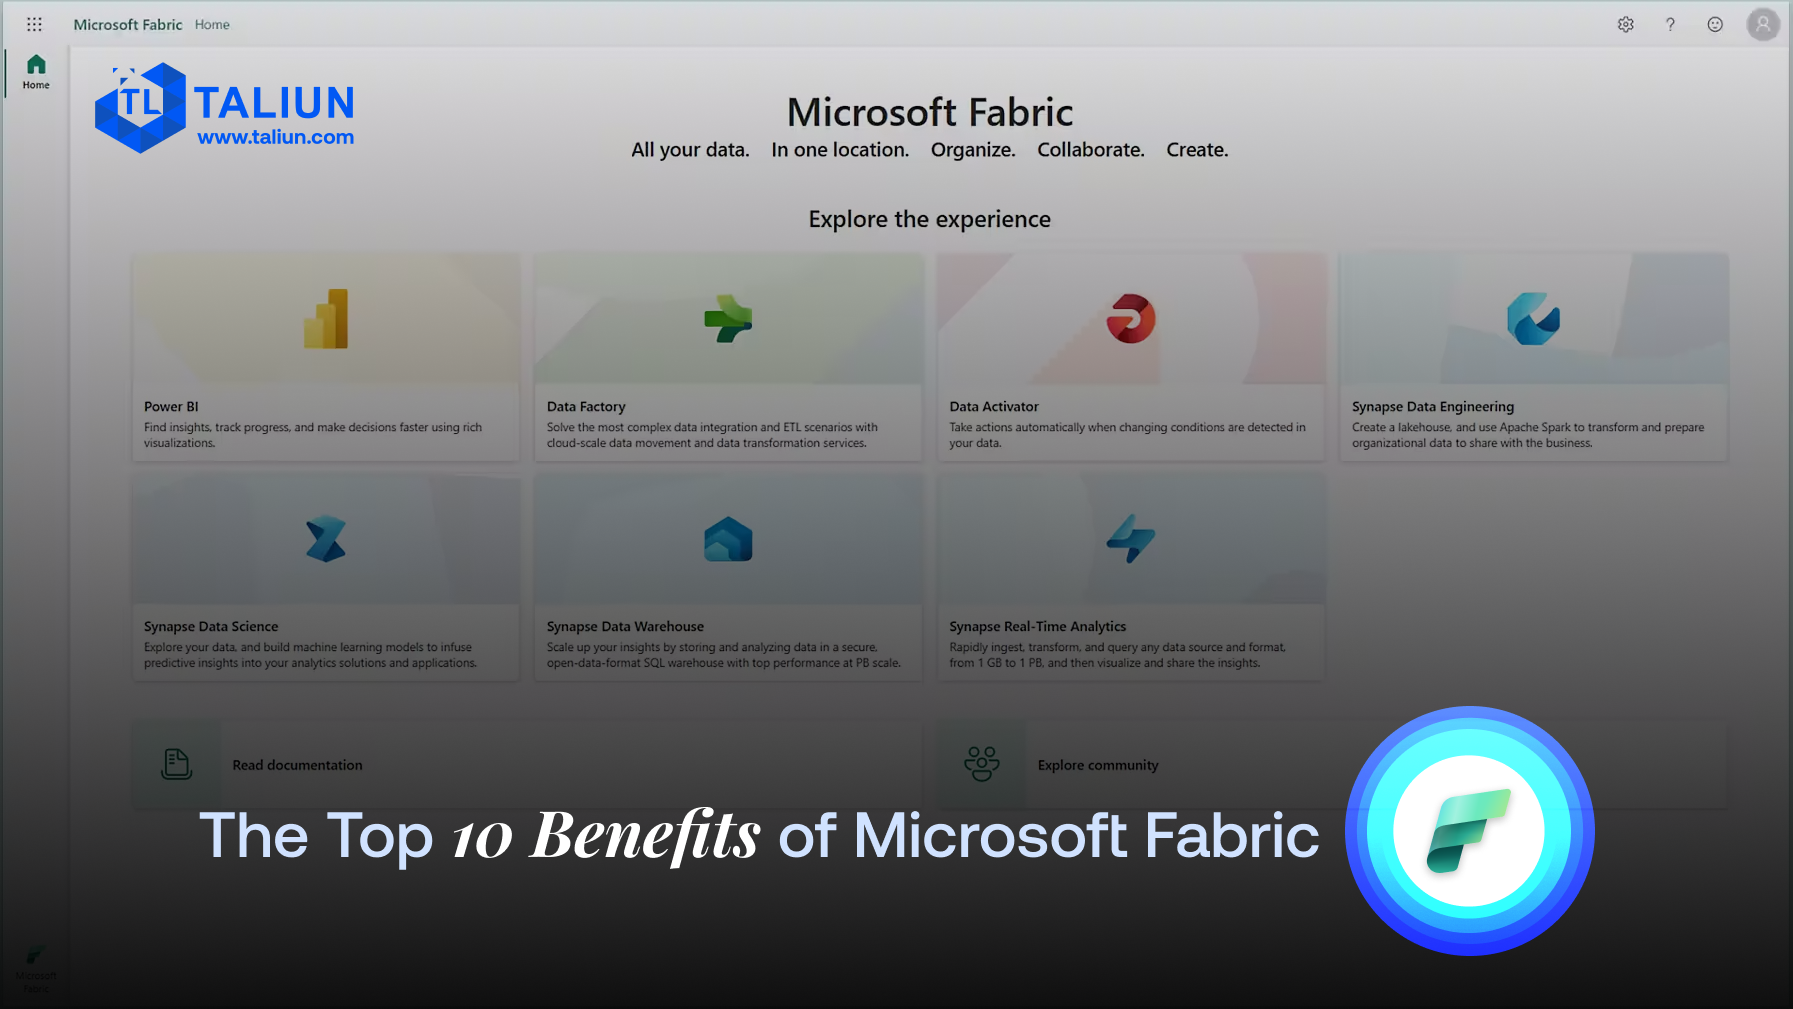 The Top 10 Benefits of Microsoft Fabric